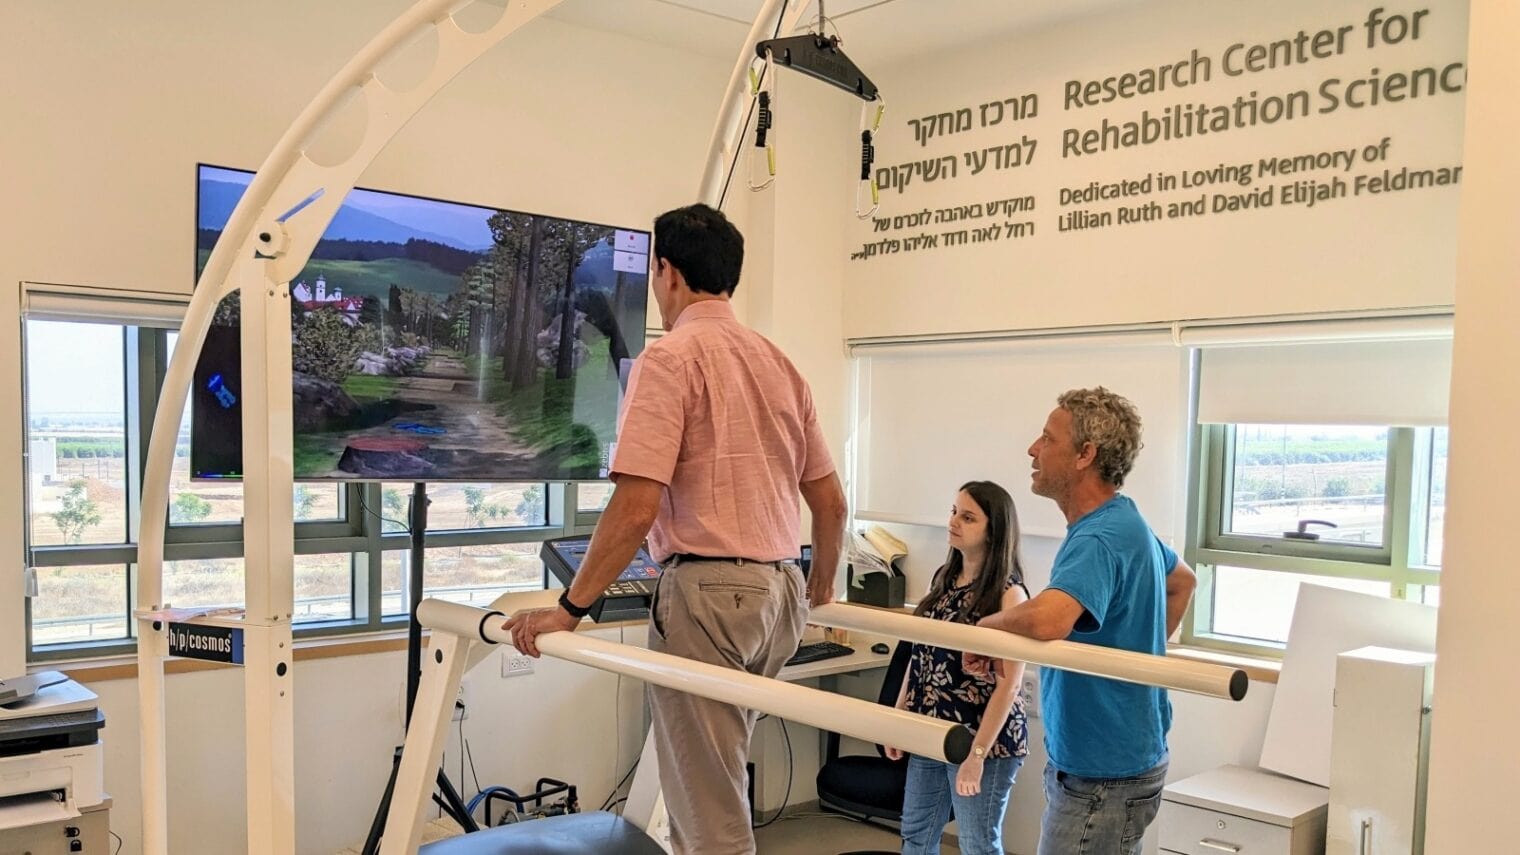 At the Translational Research Lab, JNF-USA supporter and Sephardic Foundation on Aging board member Cliff Russo tries a rehabilitation technology that takes the patient through virtual obstacles to help correct gait. Photo courtesy of ADI Negev-Nahalat Eran